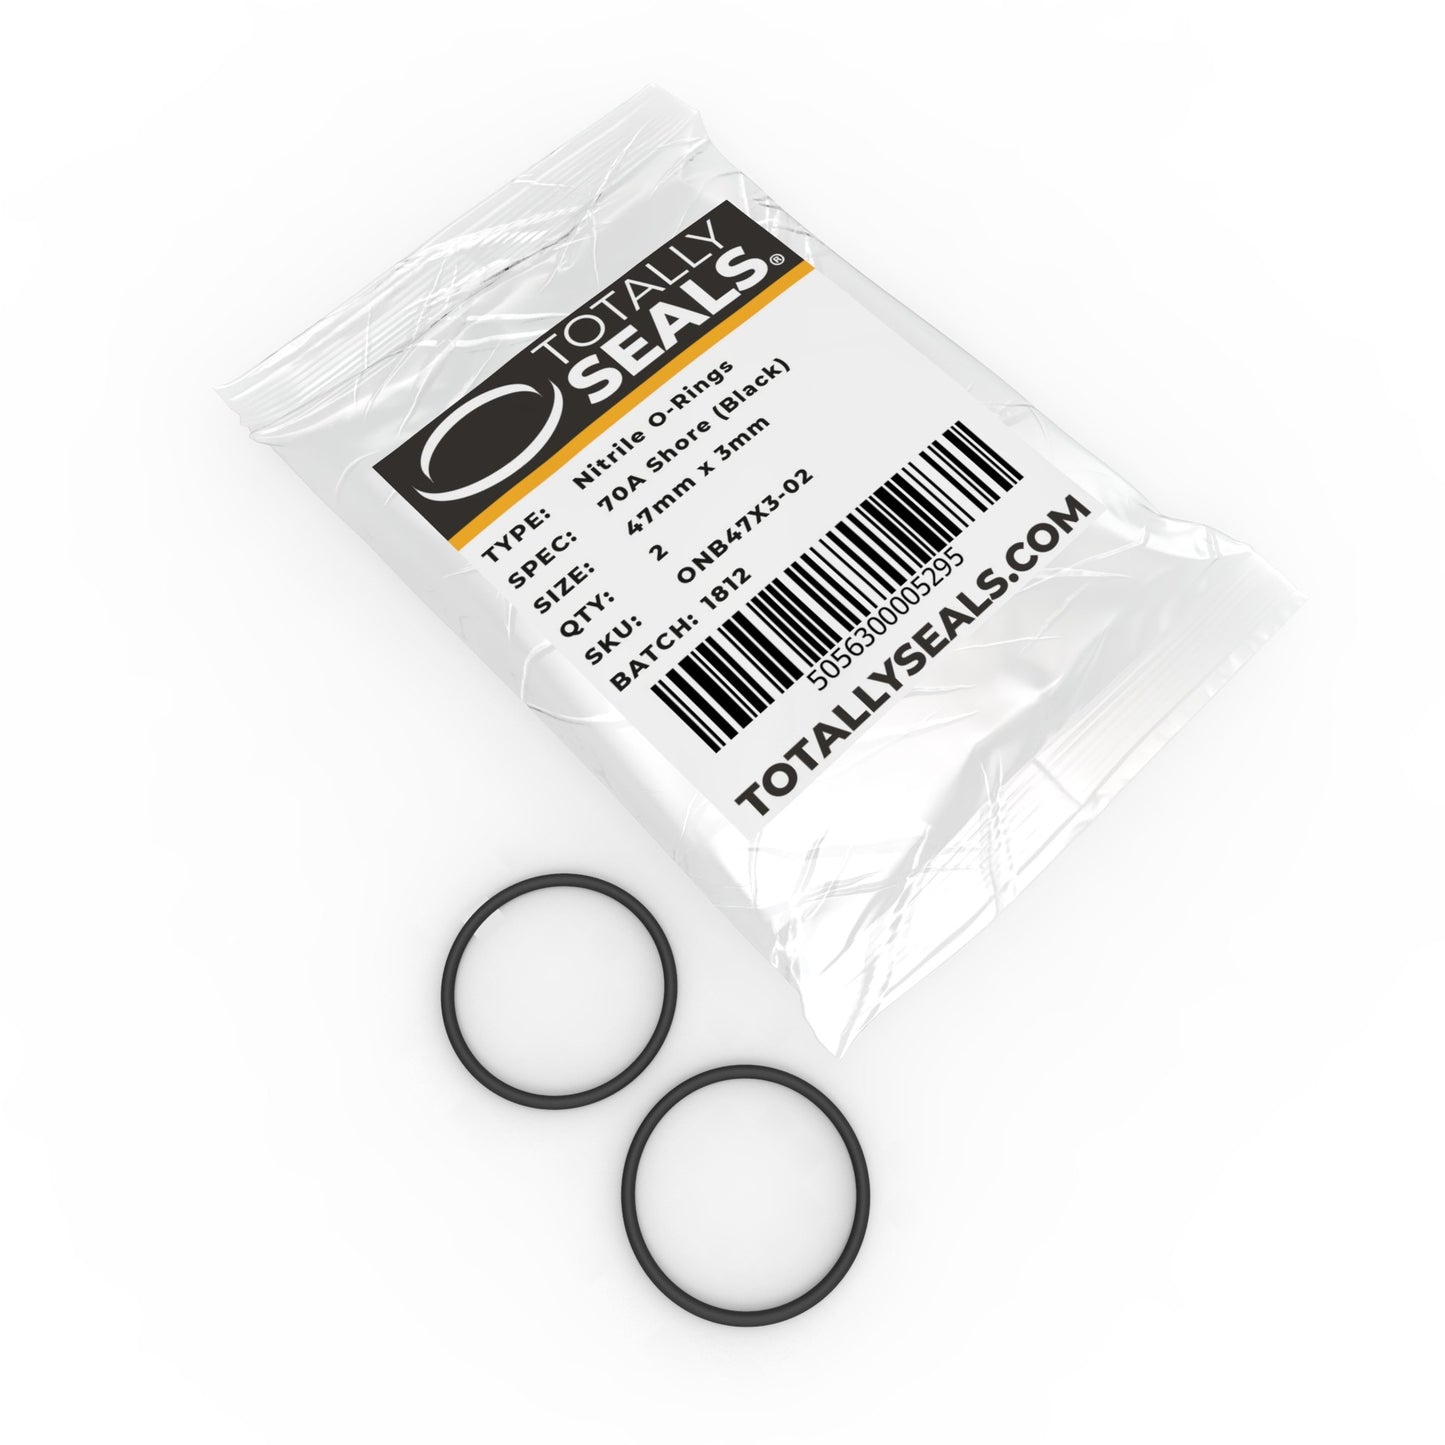 47mm x 3mm (53mm OD) Nitrile O-Rings - Totally Seals®